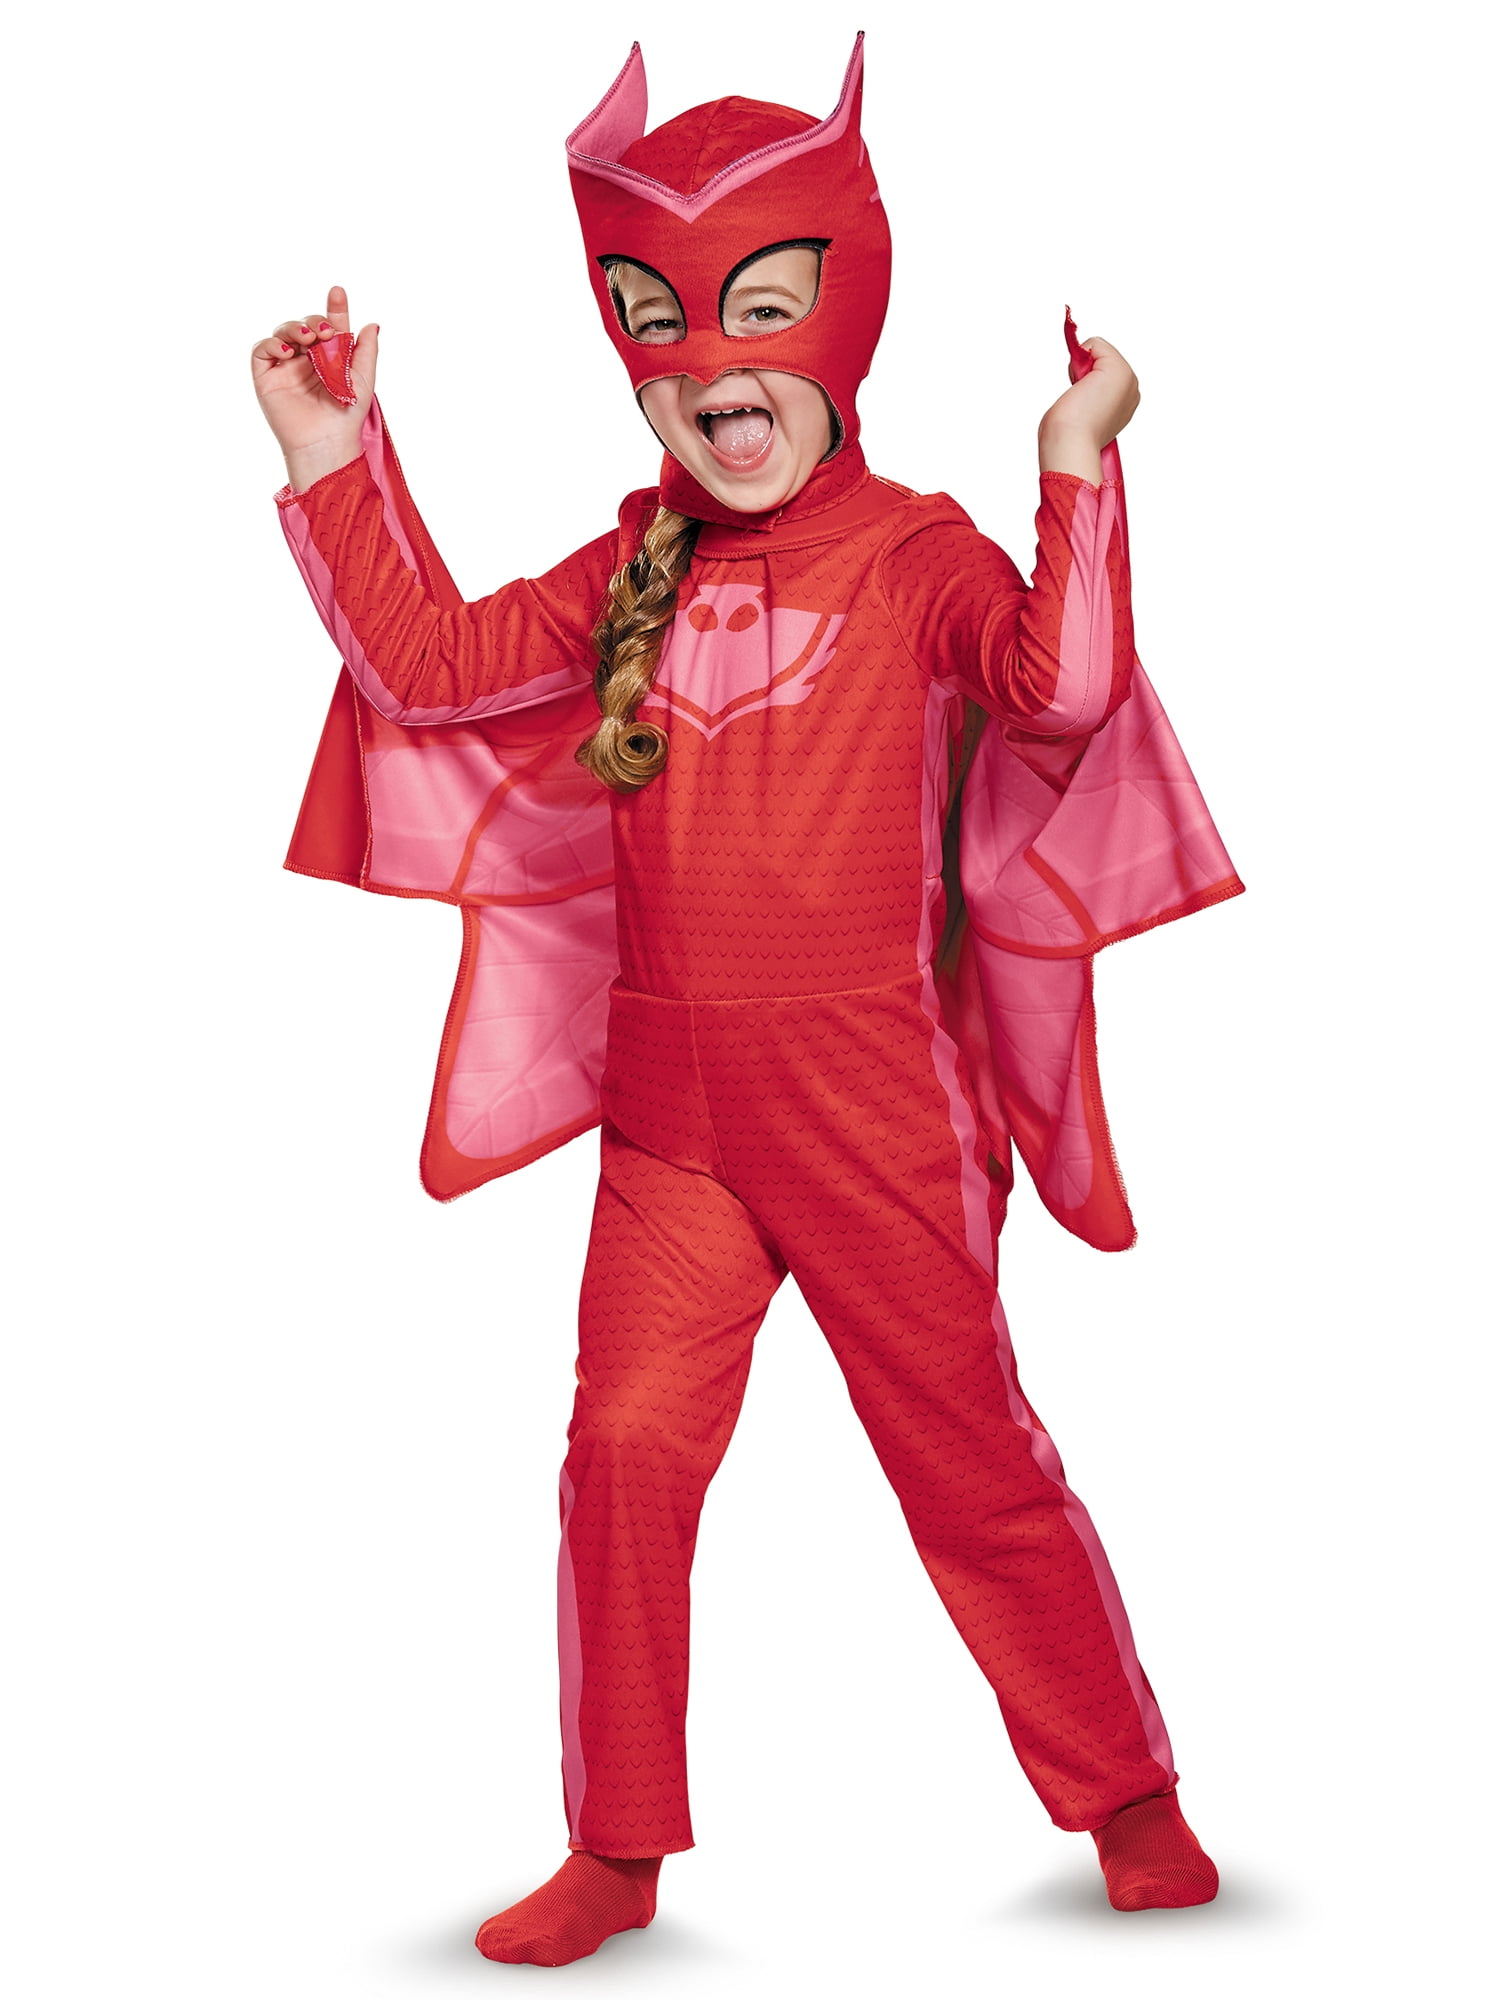 Catboy Owlette Gekko Halloween Costumes Best Kids Gifts NuGeriAZ Costumes Capes and Masks for Kids 